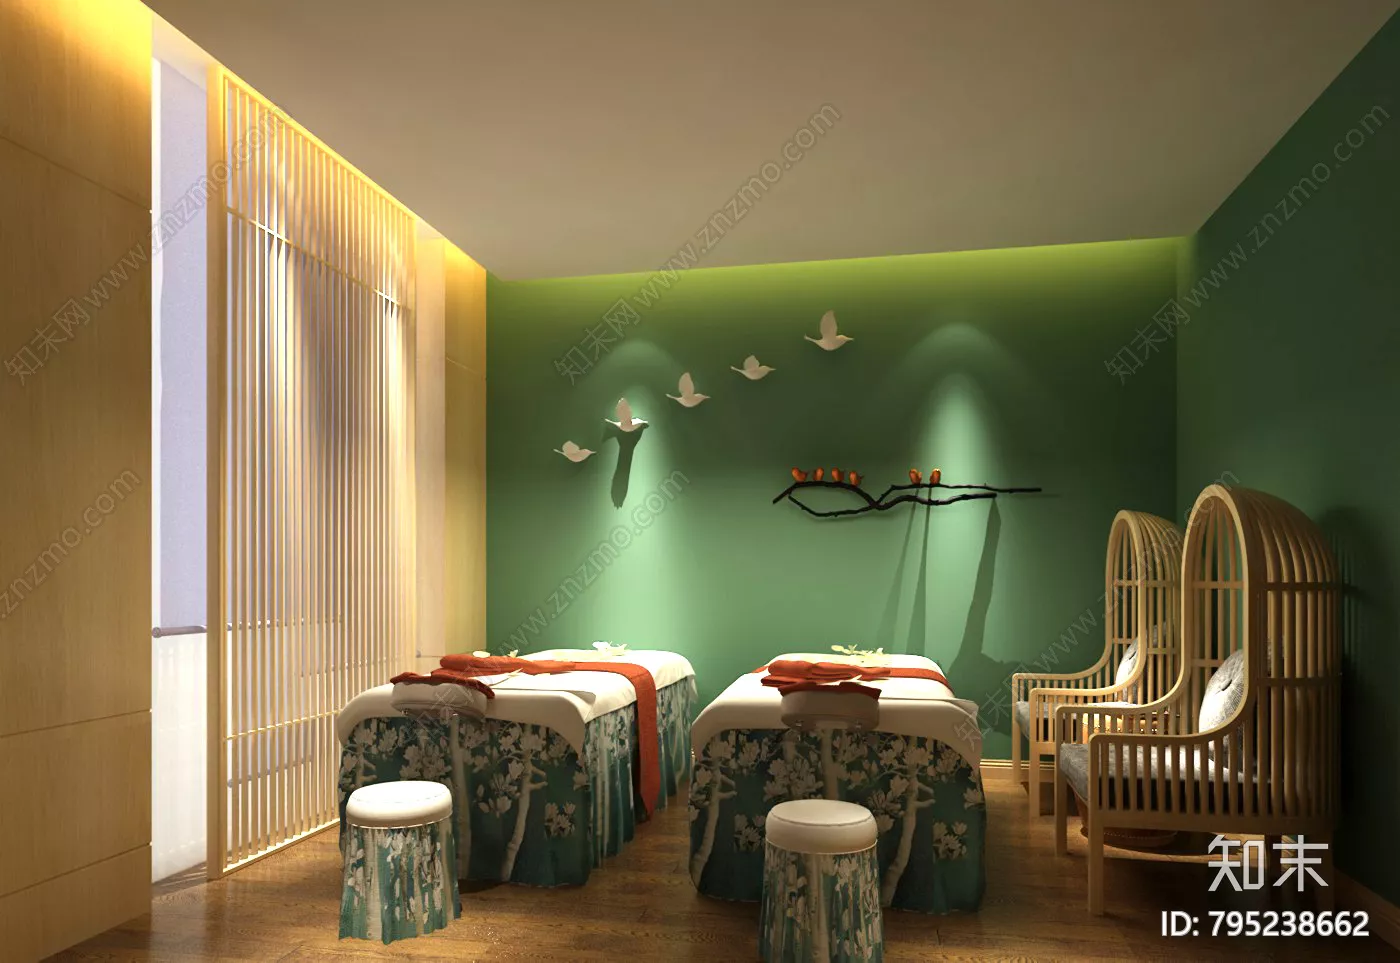 MODERN SPA AND BEAUTY - SKETCHUP 3D SCENE - VRAY OR ENSCAPE - ID14040